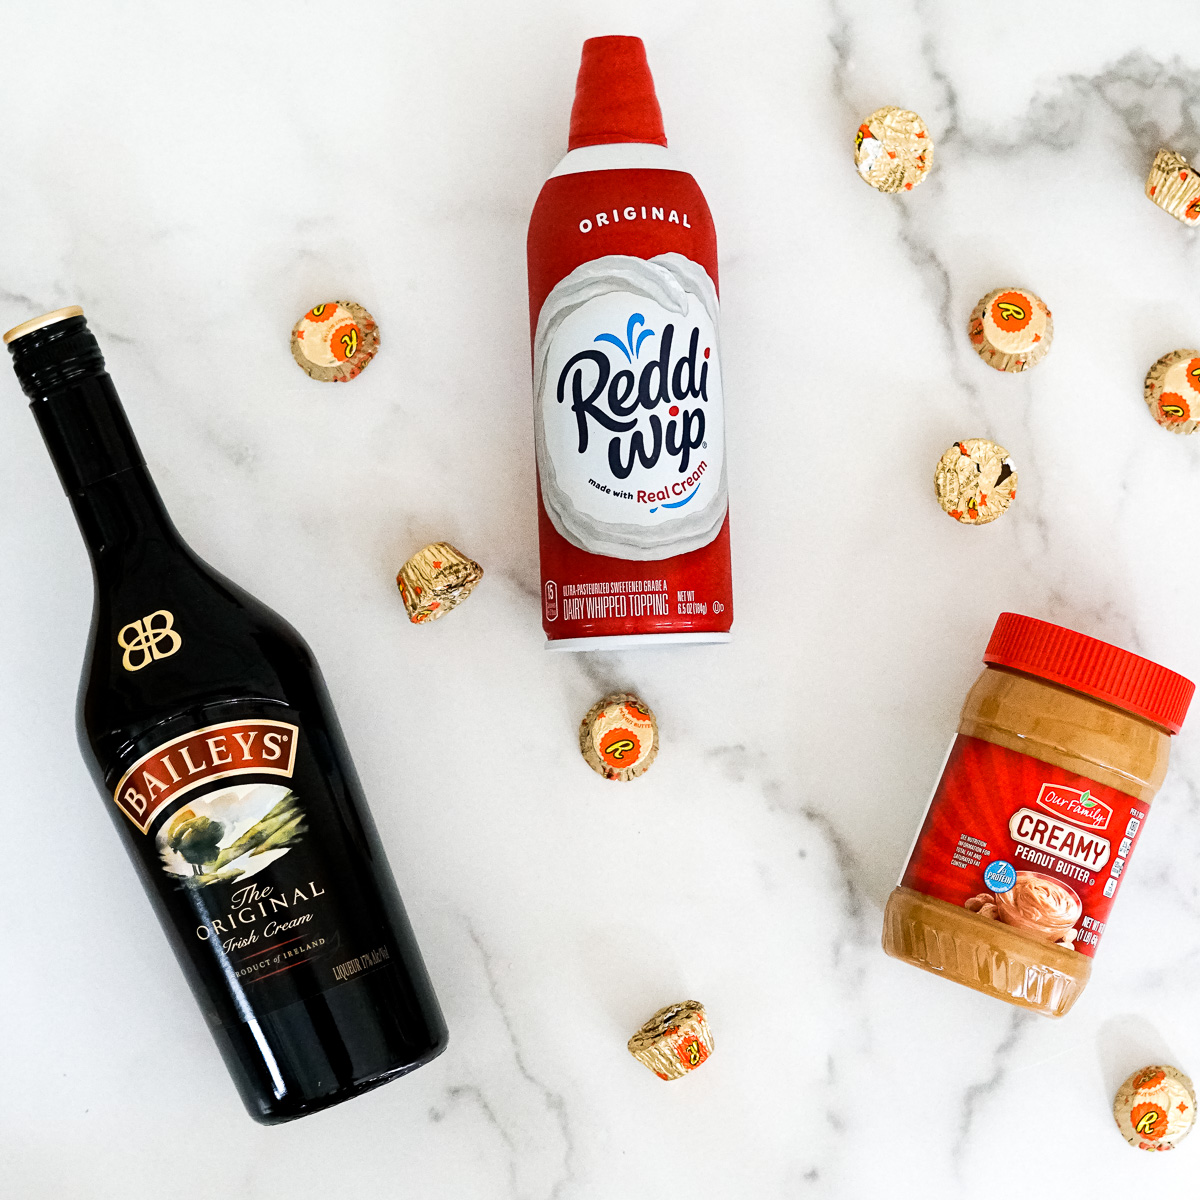 Bailey's Irish Cream, Creamy Peanut Butter, Whipped Cream and Reese's Peanut Butter Cups - Ingredients for a Bailey's Irish Cream and Peanut Butter Cup Latte